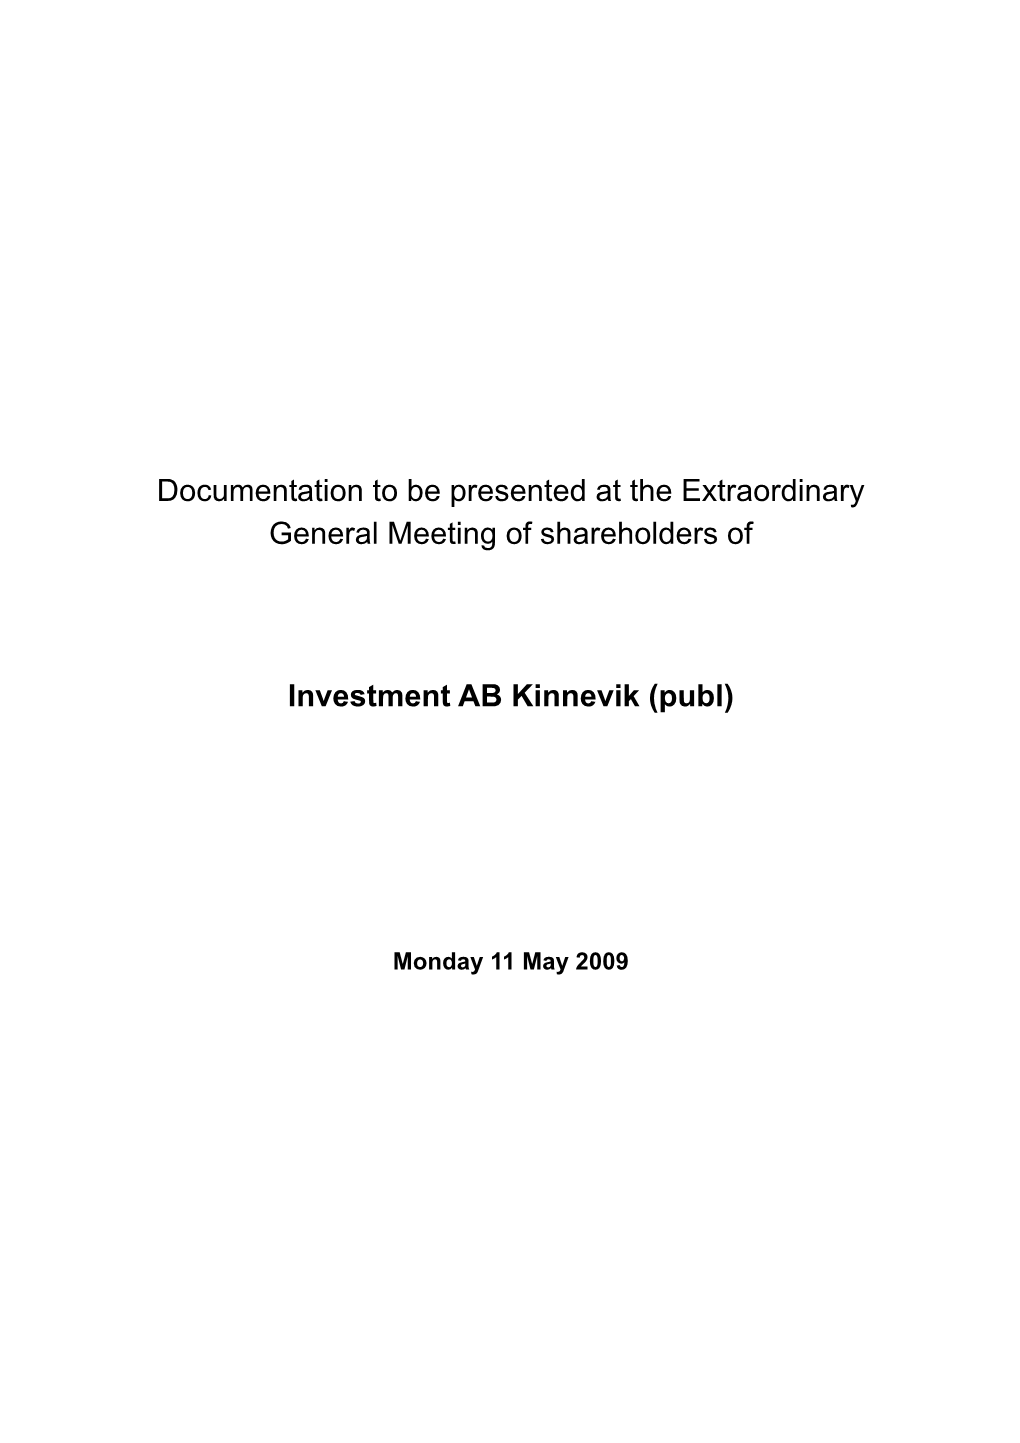 Documentation to Be Presented at the Extraordinary General Meeting of Shareholders Of